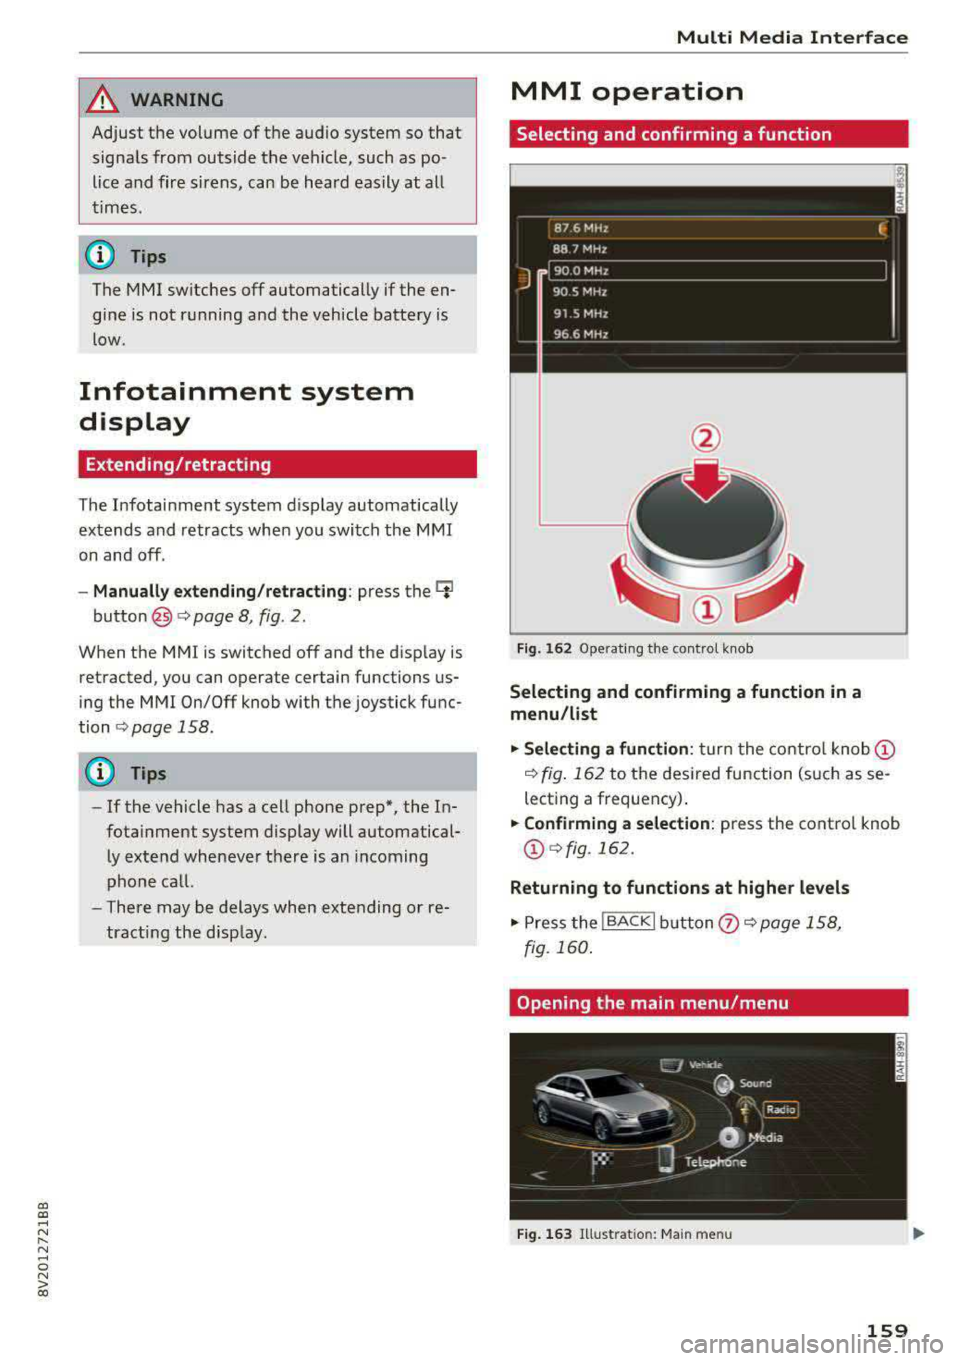 AUDI A3 SEDAN 2017  Owners Manual a,  a, ..... N 
" N ..... 0 N > 00 
A WARNING 
Adjust  the  volume  of the  audio  system  so that signals  from  outside  the  vehicle,  such  as  po­ 
lice and  fire  sirens,  can  be  heard  easil